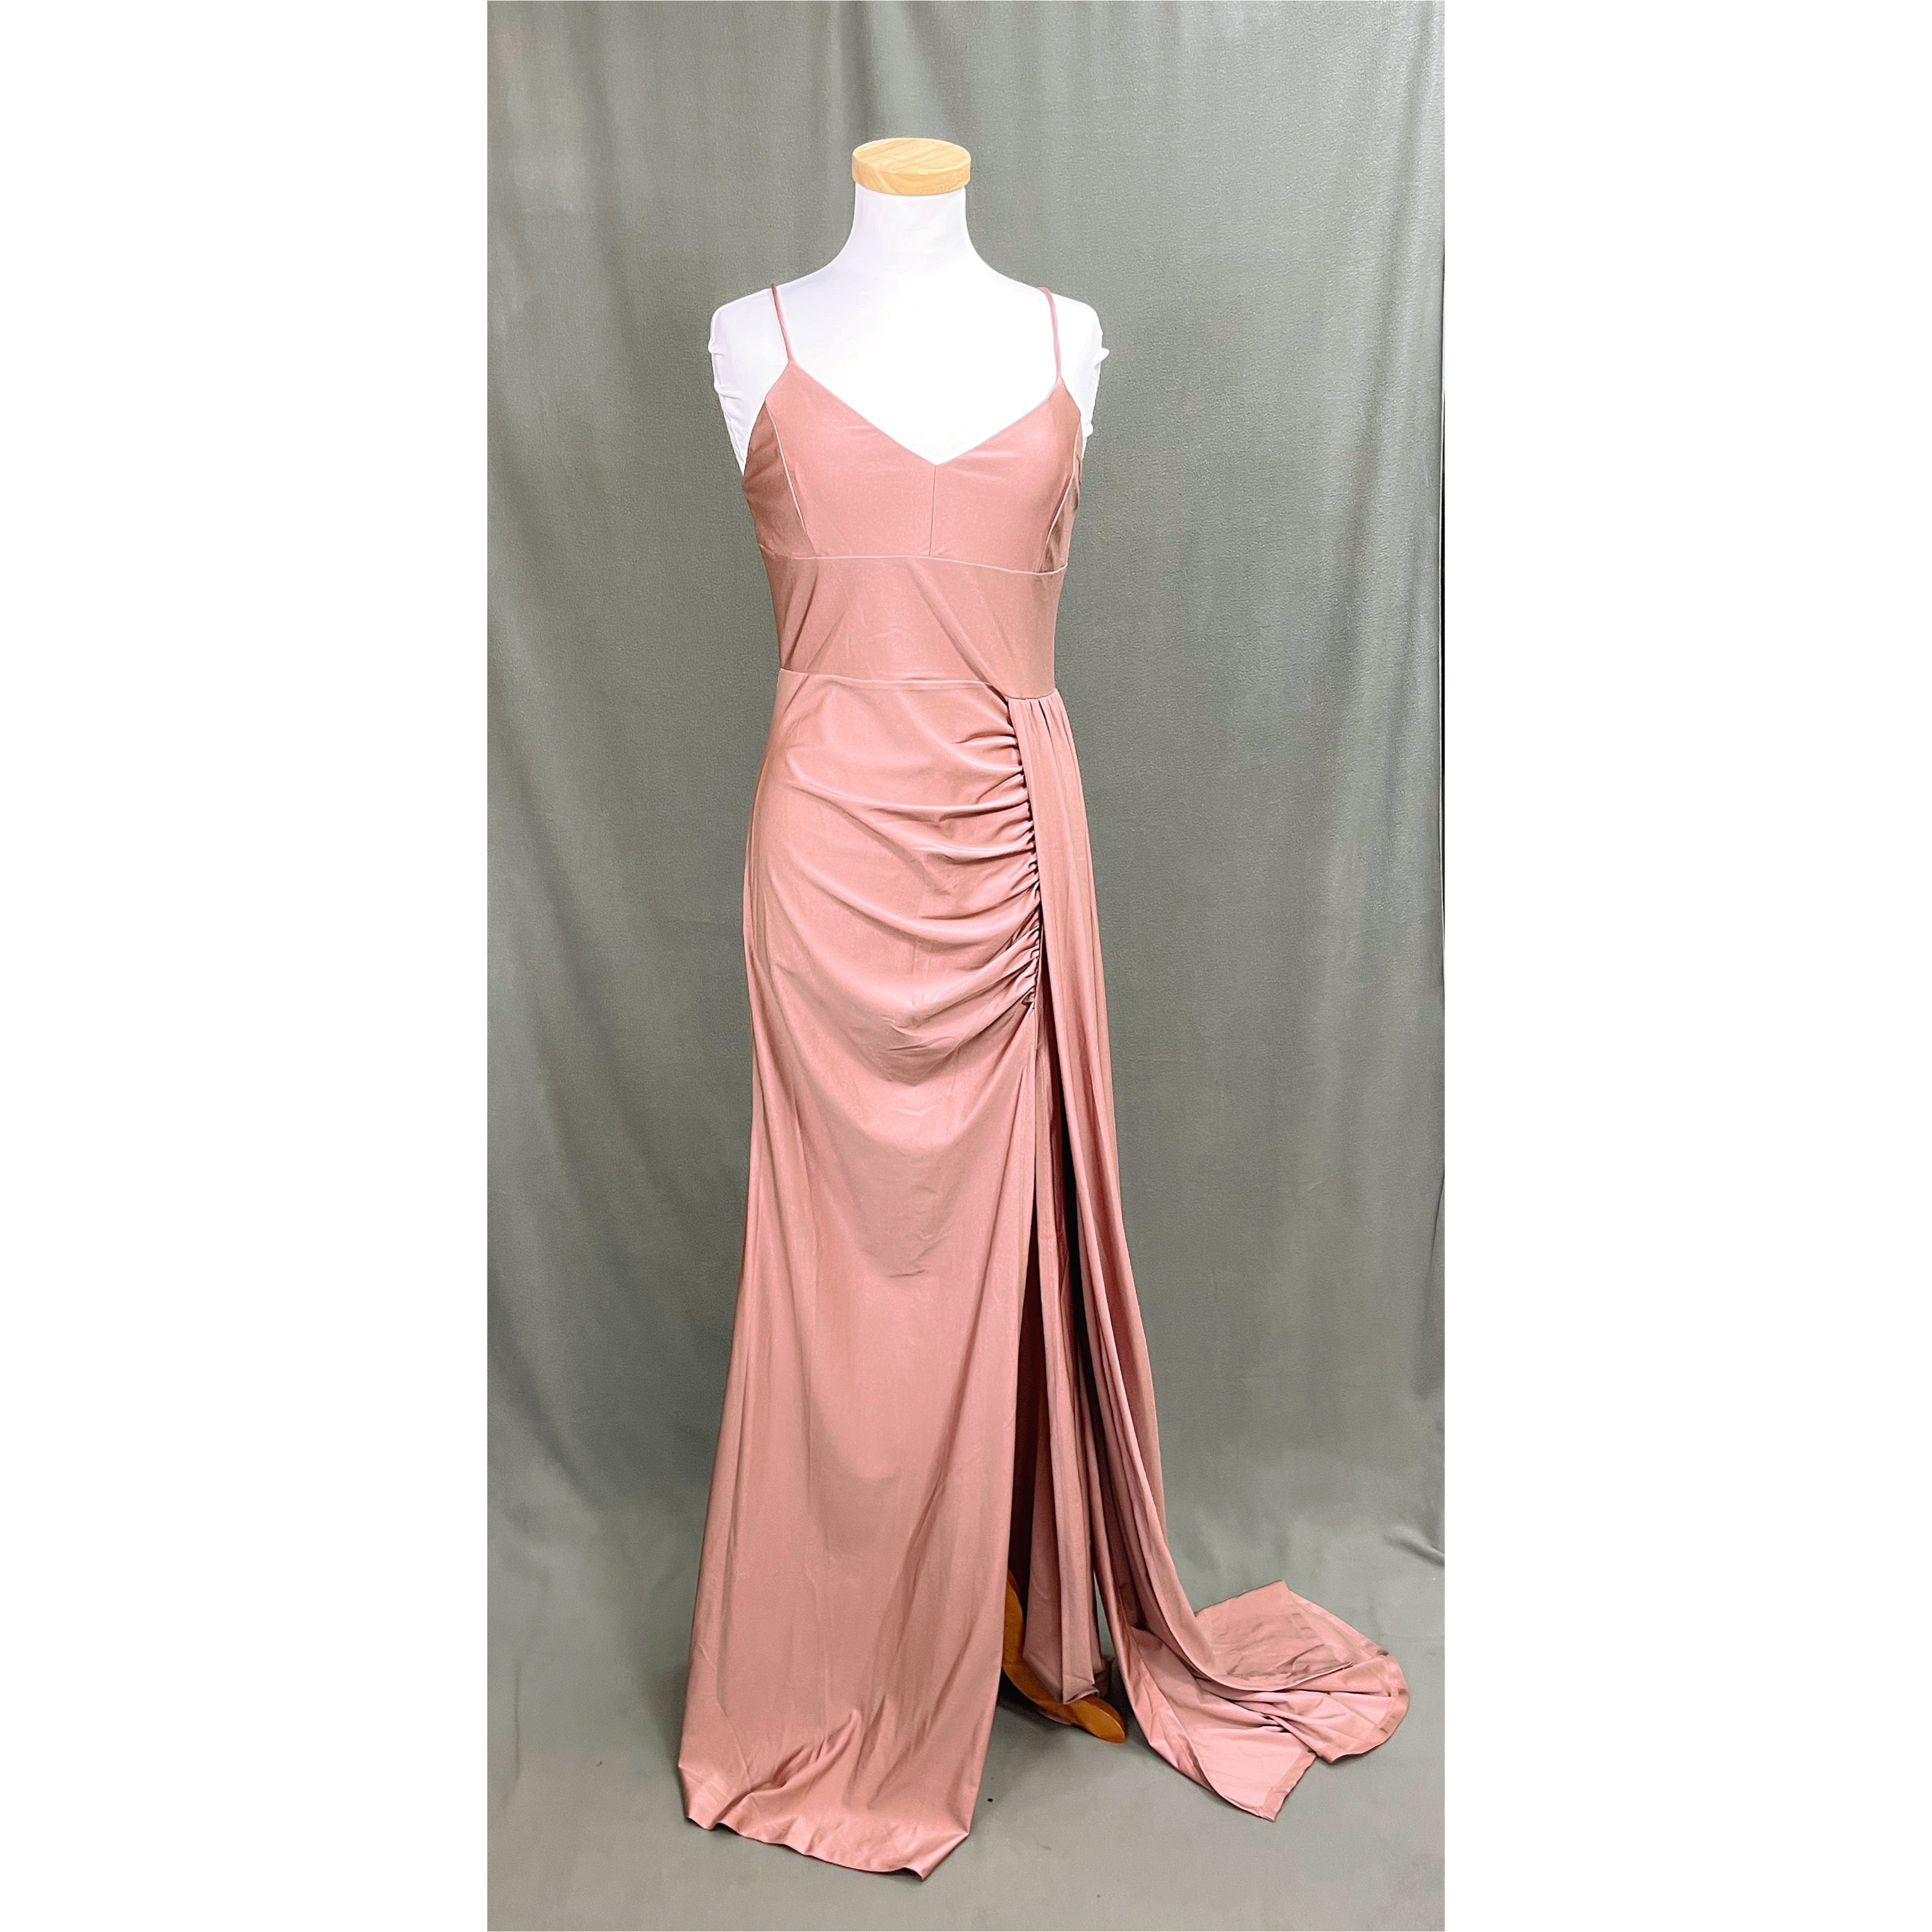 Cefian blush dress with train, sizes M & L, NEW WITH TAGS!